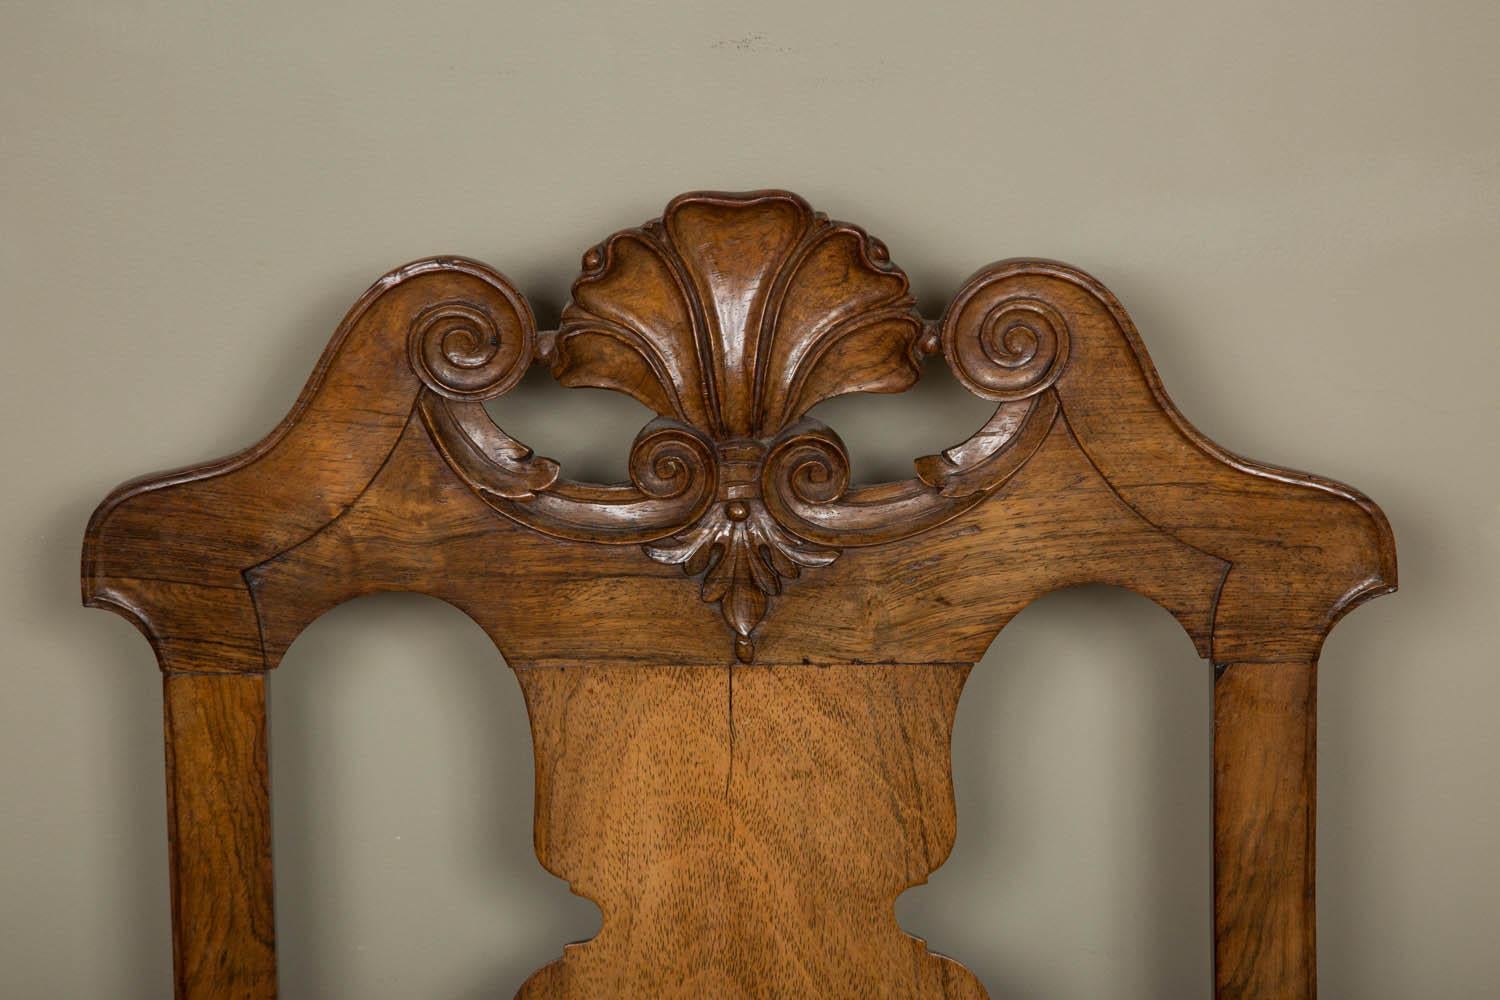 A highly decorative pair of mid-18th century Portuguese Brazilian rosewood high back chairs with beautiful scrolling pediment at the top with carved shell in the middle and on cabriole legs terminating in pad feet and ondulated stretchers.
Finely